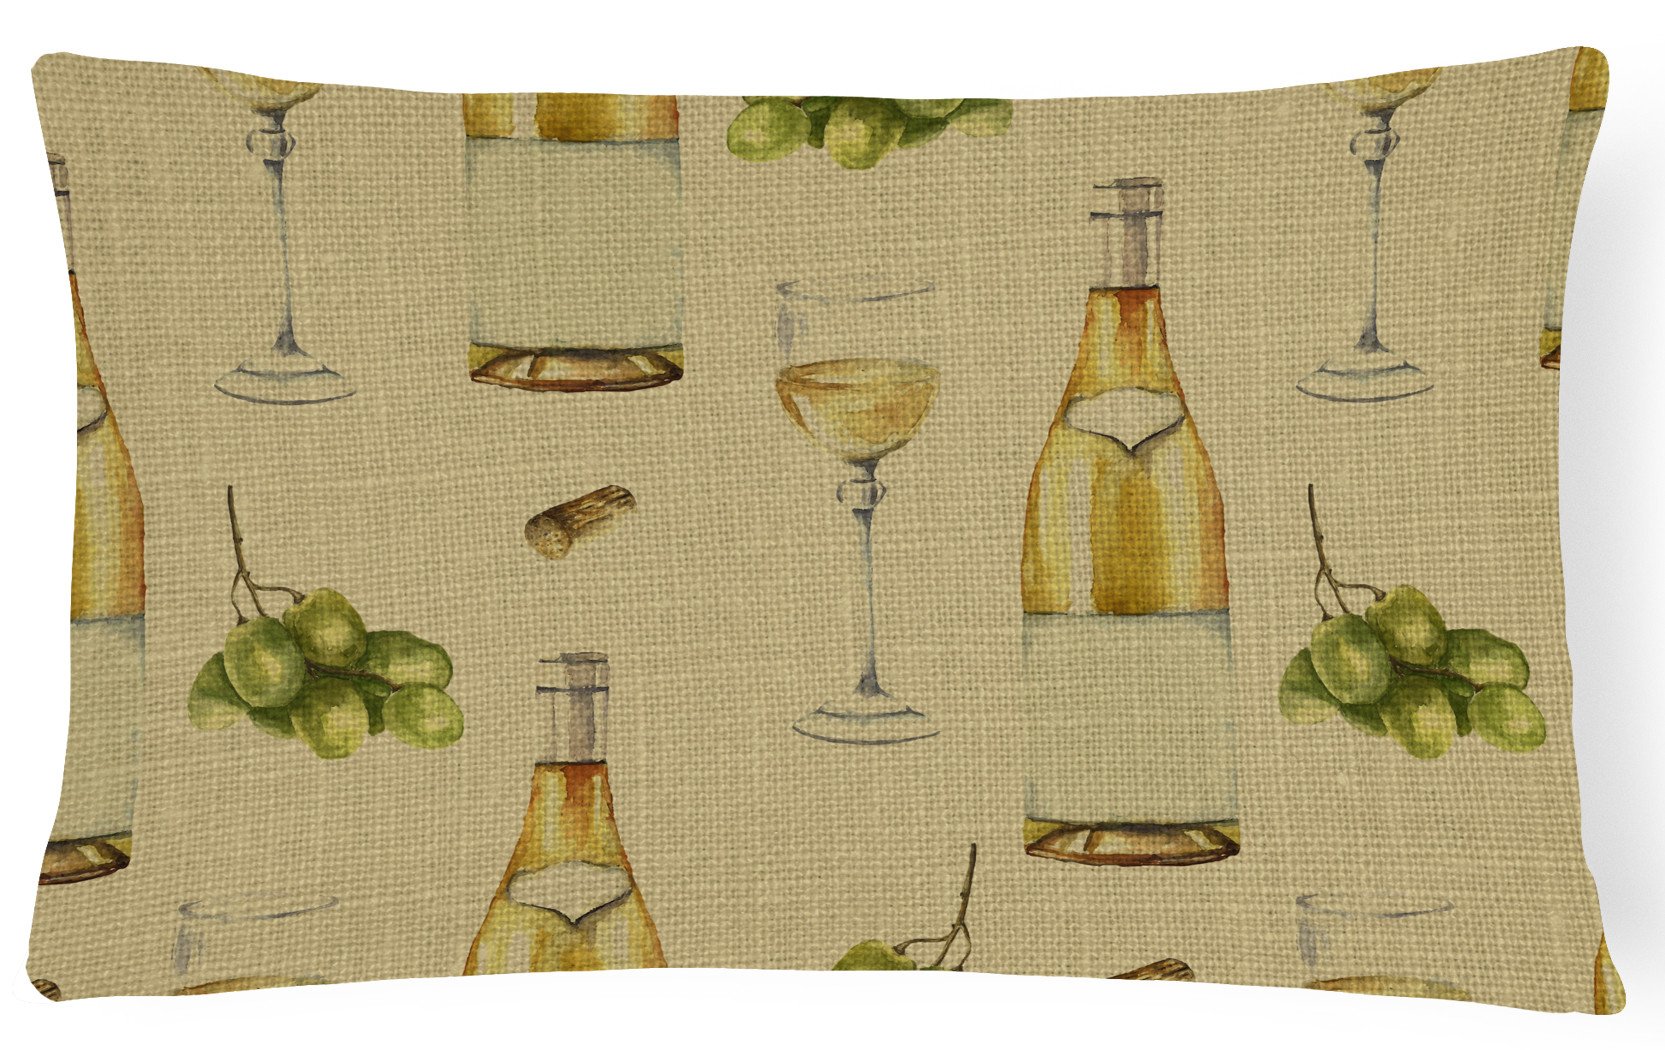 White Wine on Linen Canvas Fabric Decorative Pillow BB5194PW1216 by Caroline's Treasures